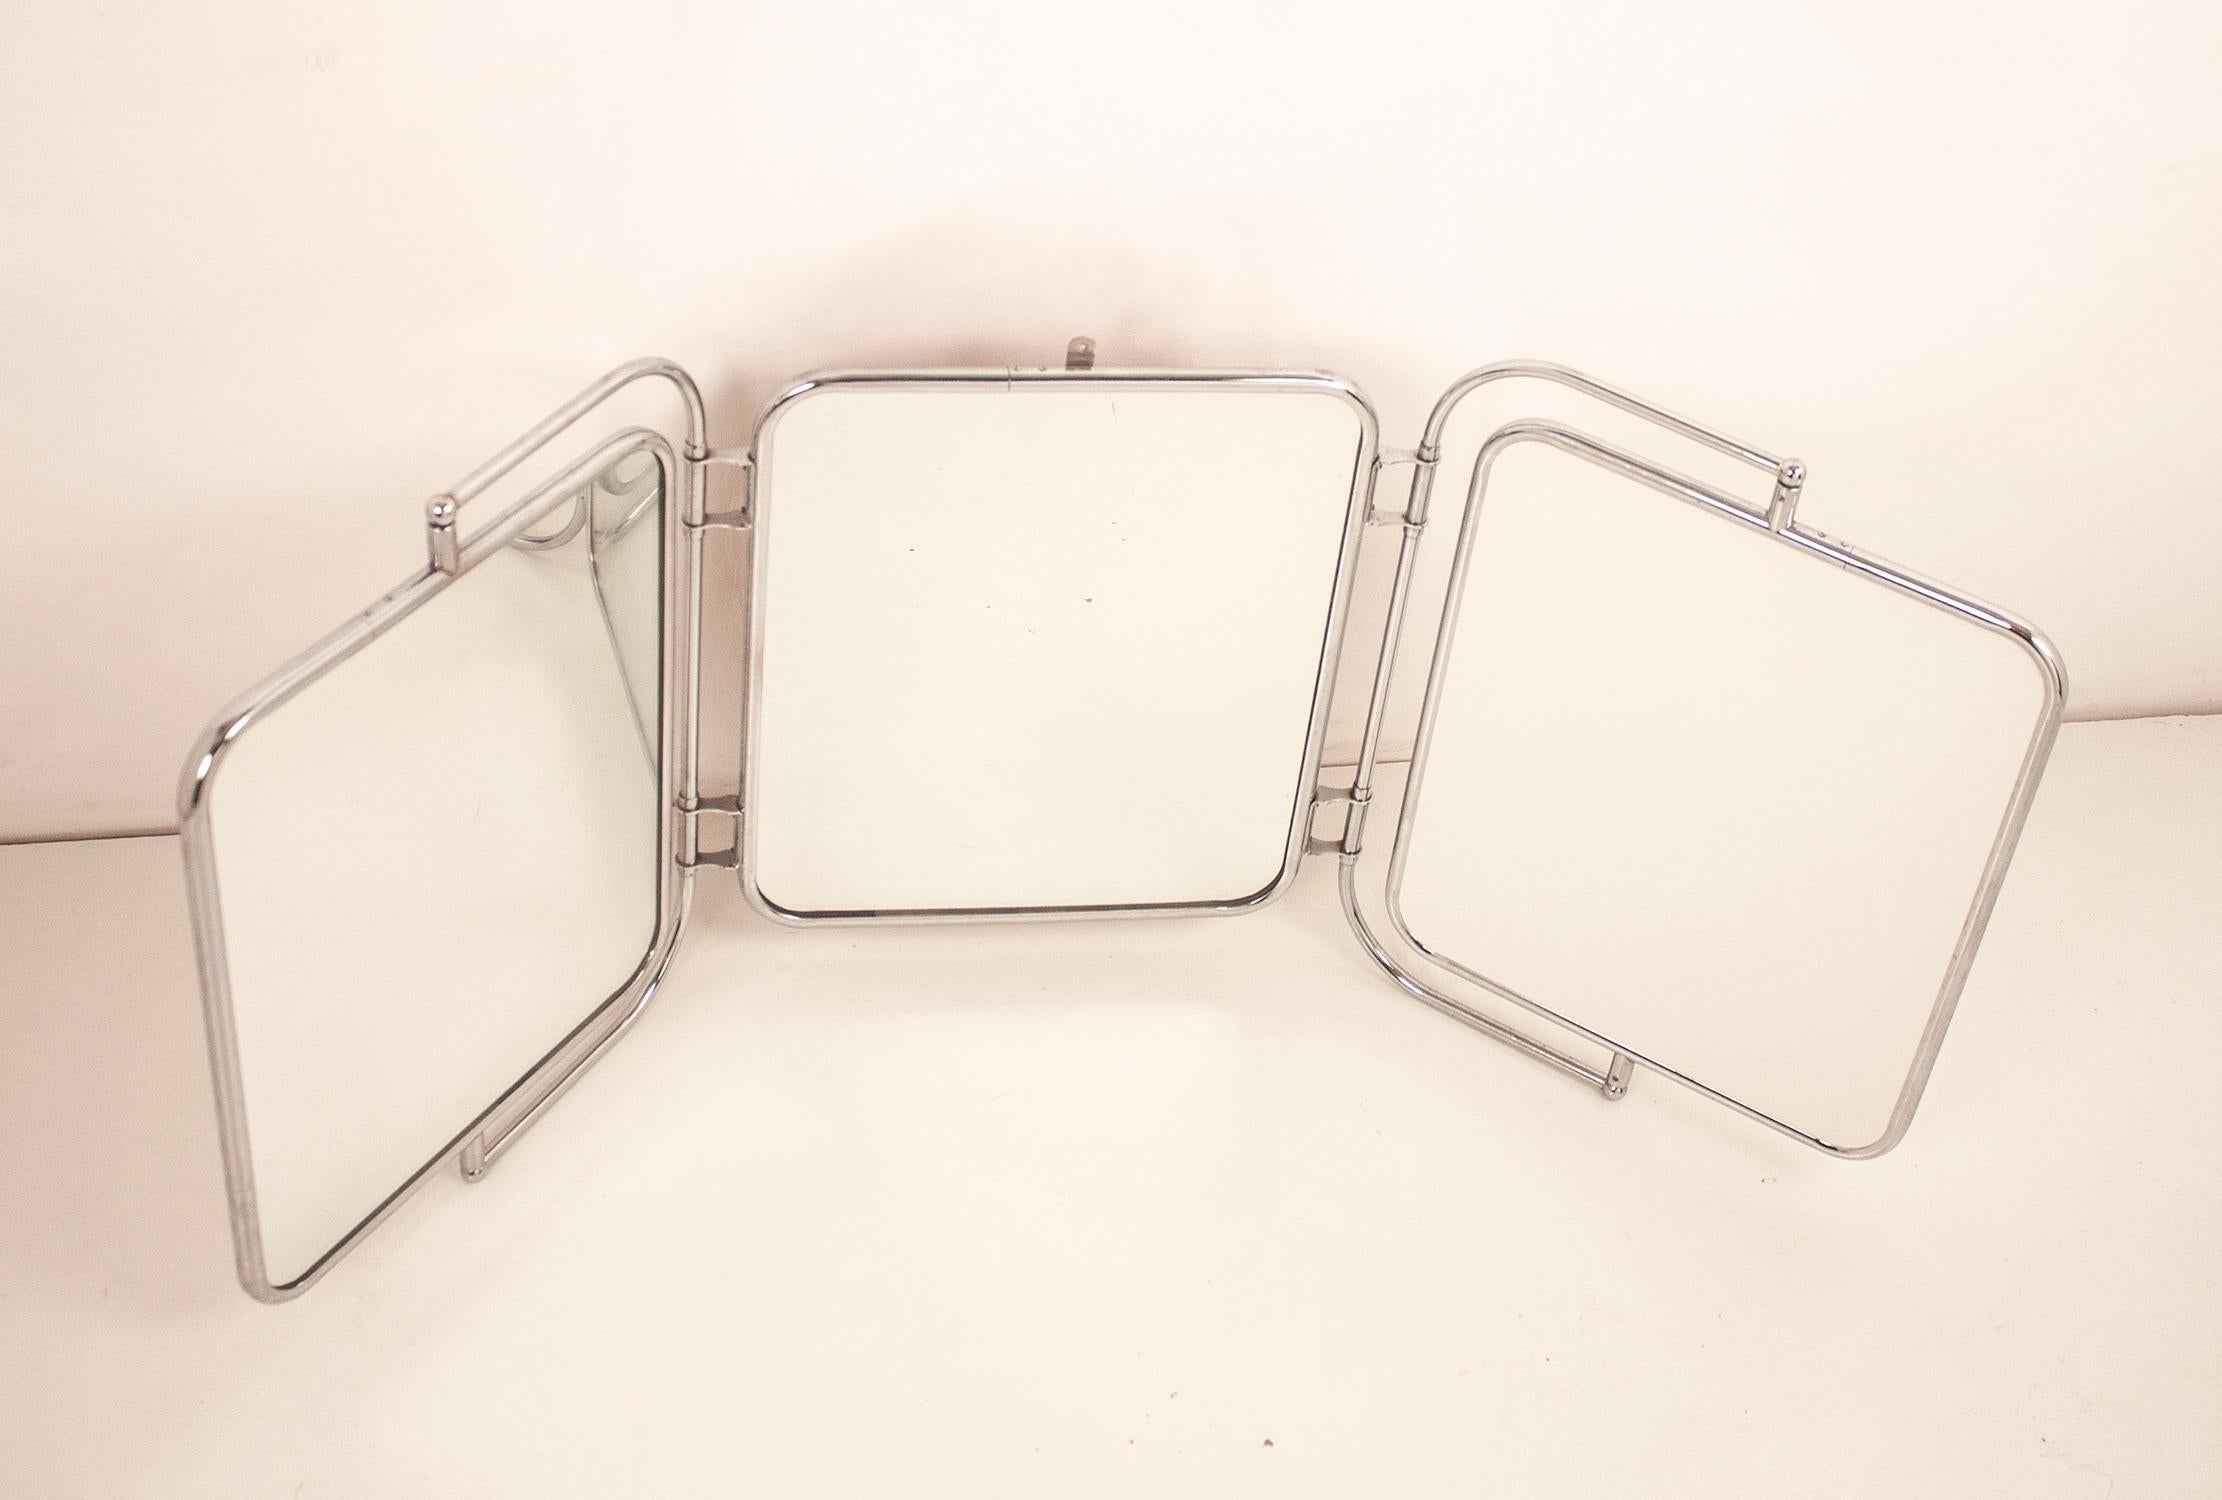 Wall triptych mirror white bakelite and chrome. Spain, 1940s.
It is a very difficult mirror to find today.
And more in this state that is in very good condition.
The rear of the side mirrors is white and makes it very attractive.
In addition to